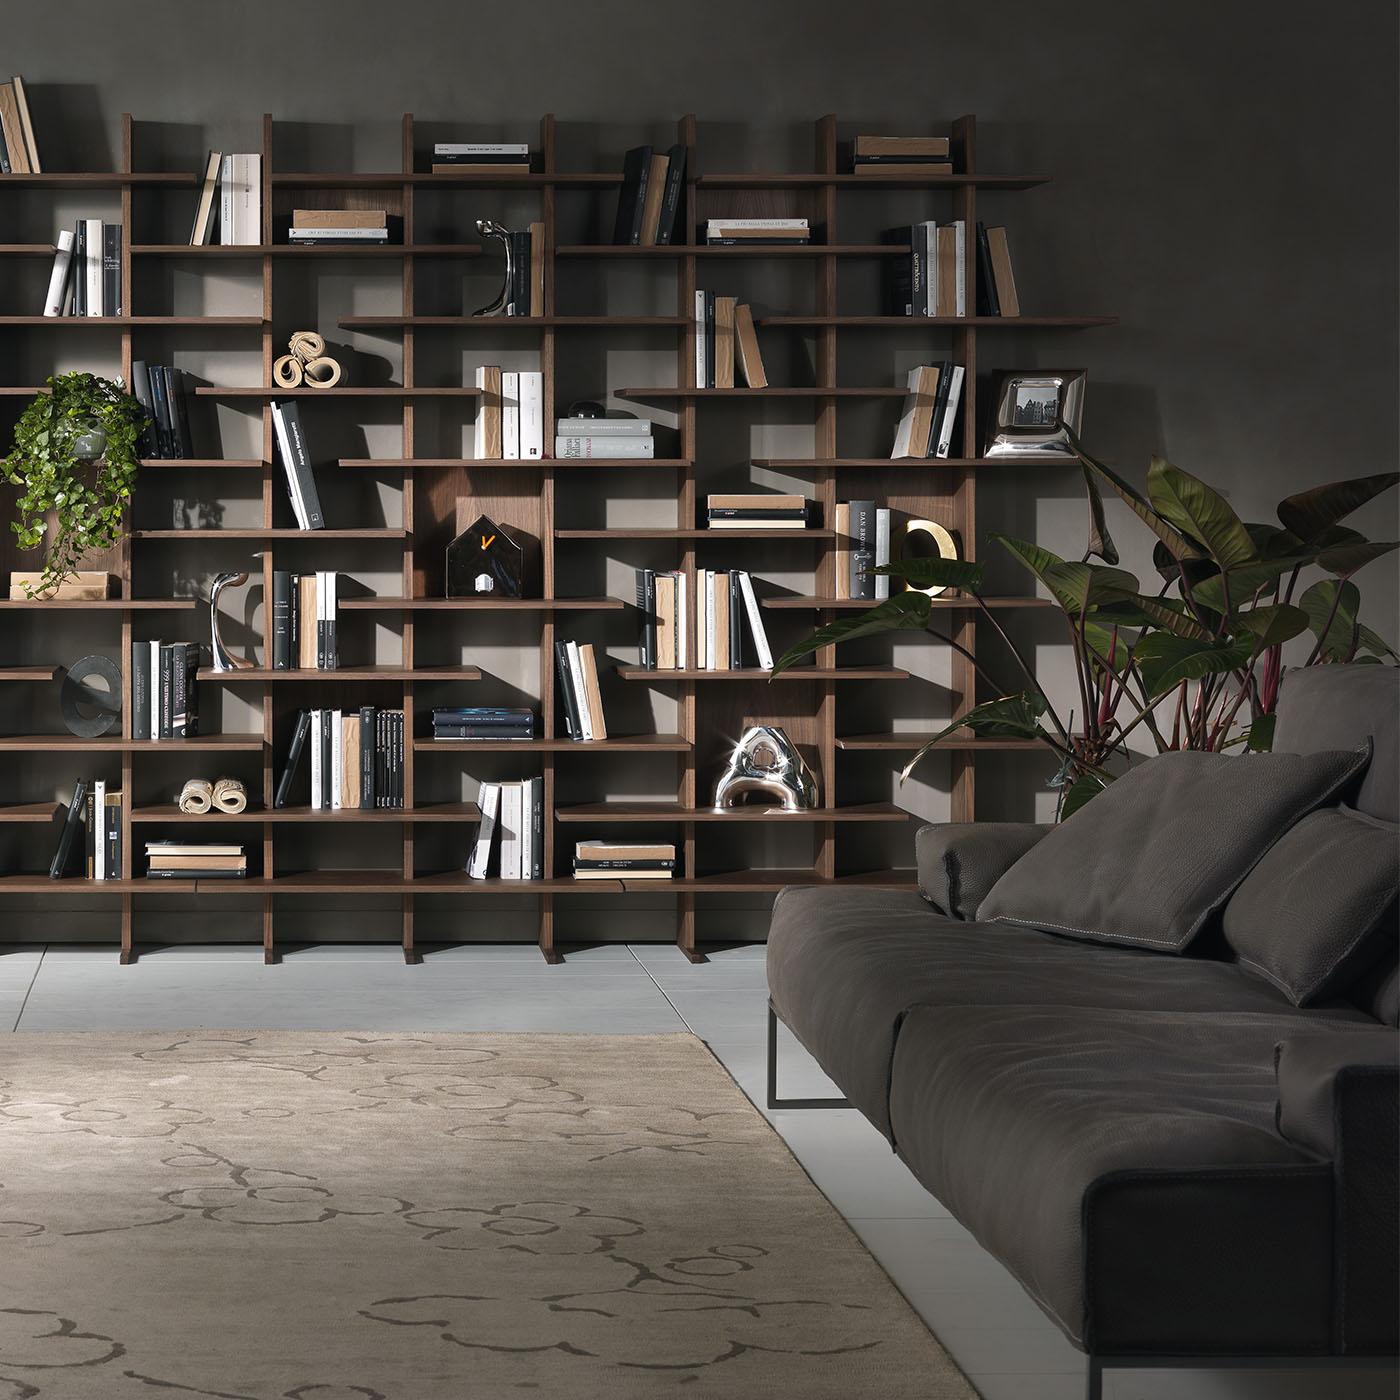 Designed by Cesare Arosio and Beatrice Fanchini, this modular, two-sided bookcase is an elegant addition to a contemporary living or study space. It features a clean yet sculptural contemporary design, handcrafted from Canaletto walnut or